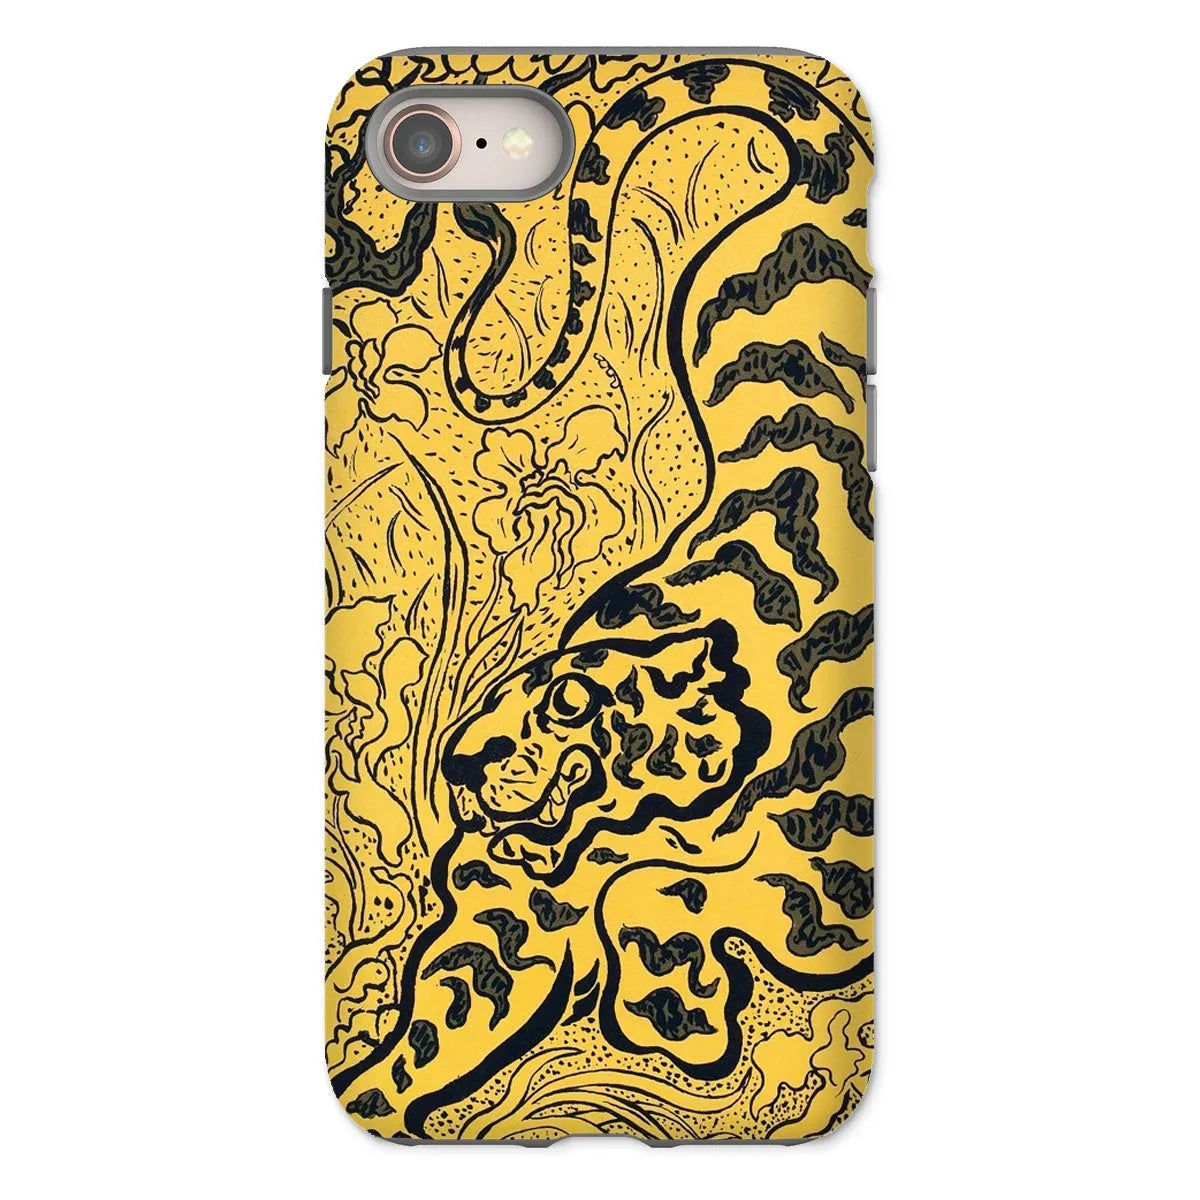 Tiger In The Jungle - Graphic Art Phone Case - Paul Ranson - Iphone 8 / Matte - Mobile Phone Cases - Aesthetic Art